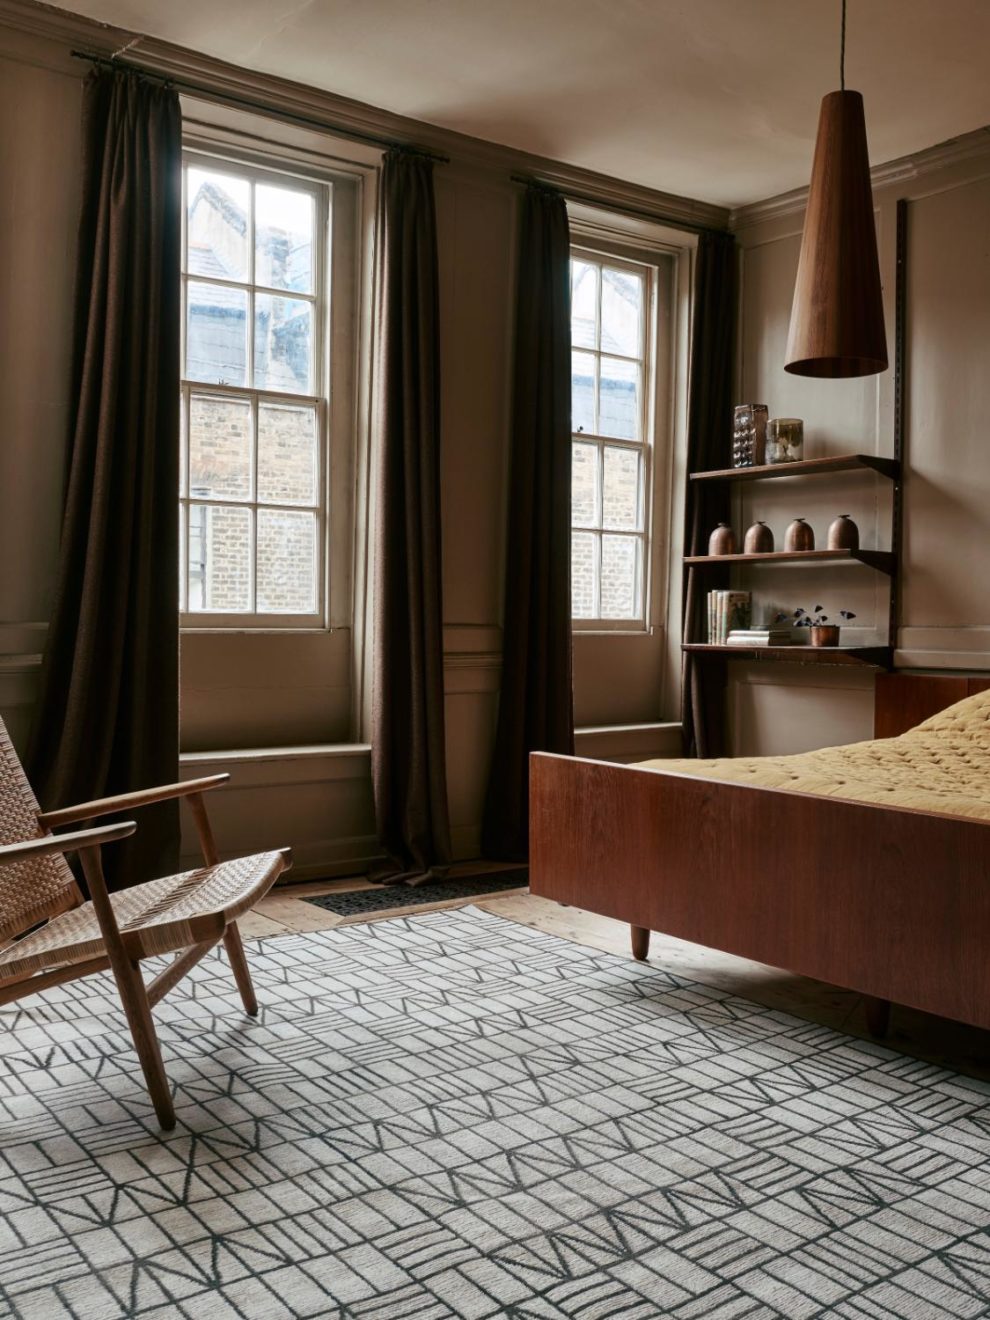 Sitio by Commune - Photograph by Christopher Horwood - Christopher Farr Rugs - Aucoot Estate Agents - Design Directory